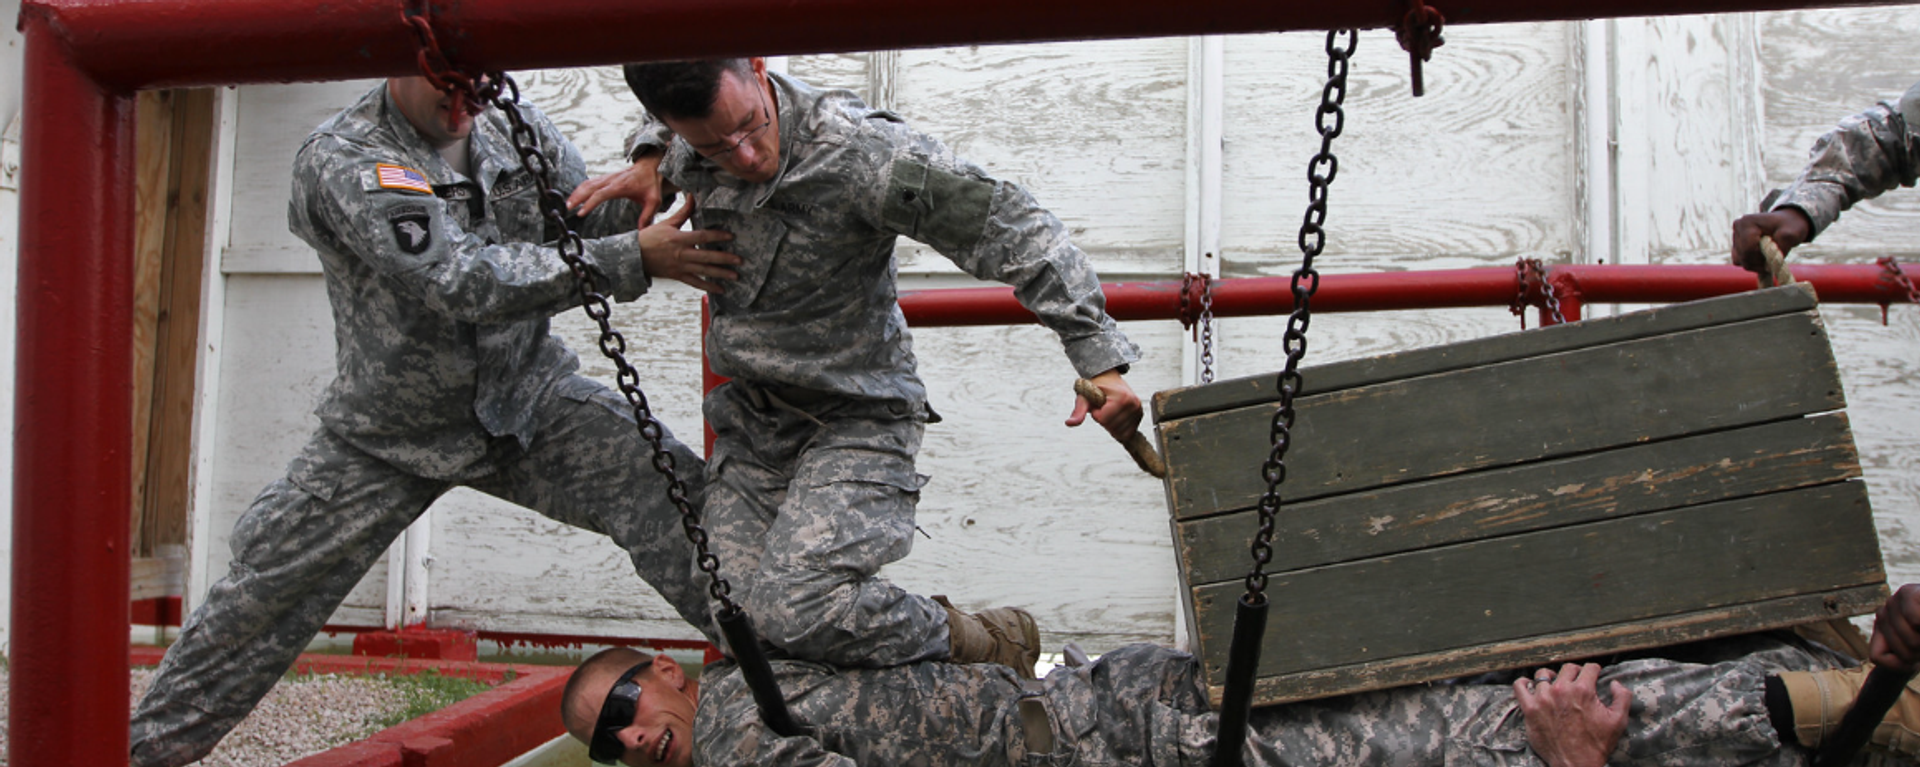 US Army trainees navigate obstacles at Leaders Reaction Course, Fort Hood, Texas. File photo. - Sputnik International, 1920, 26.06.2022